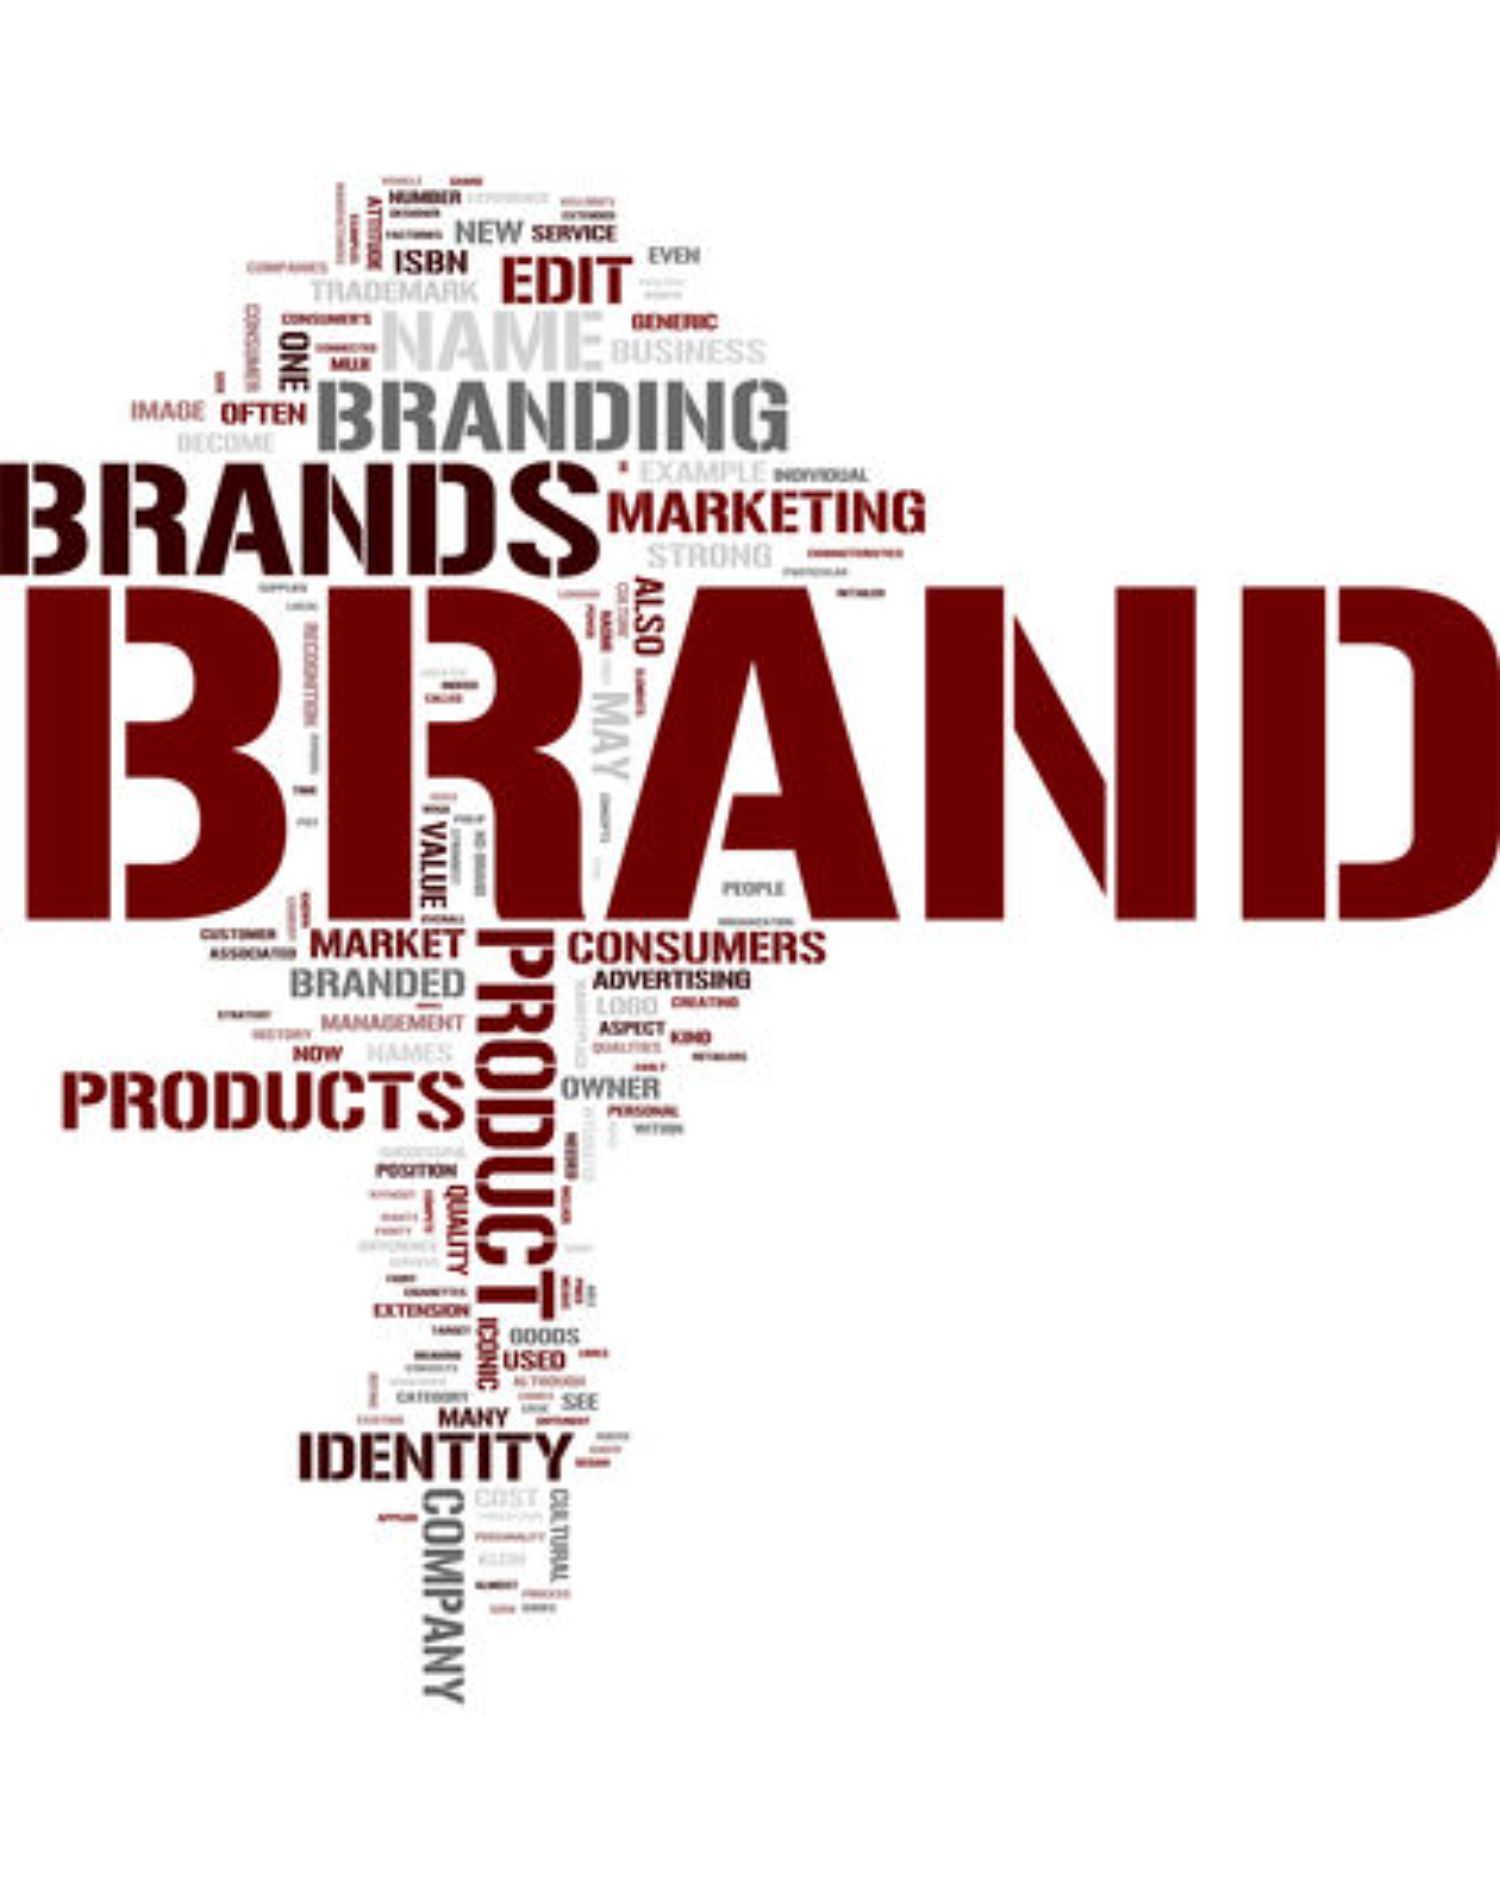 Product offerings and brand 